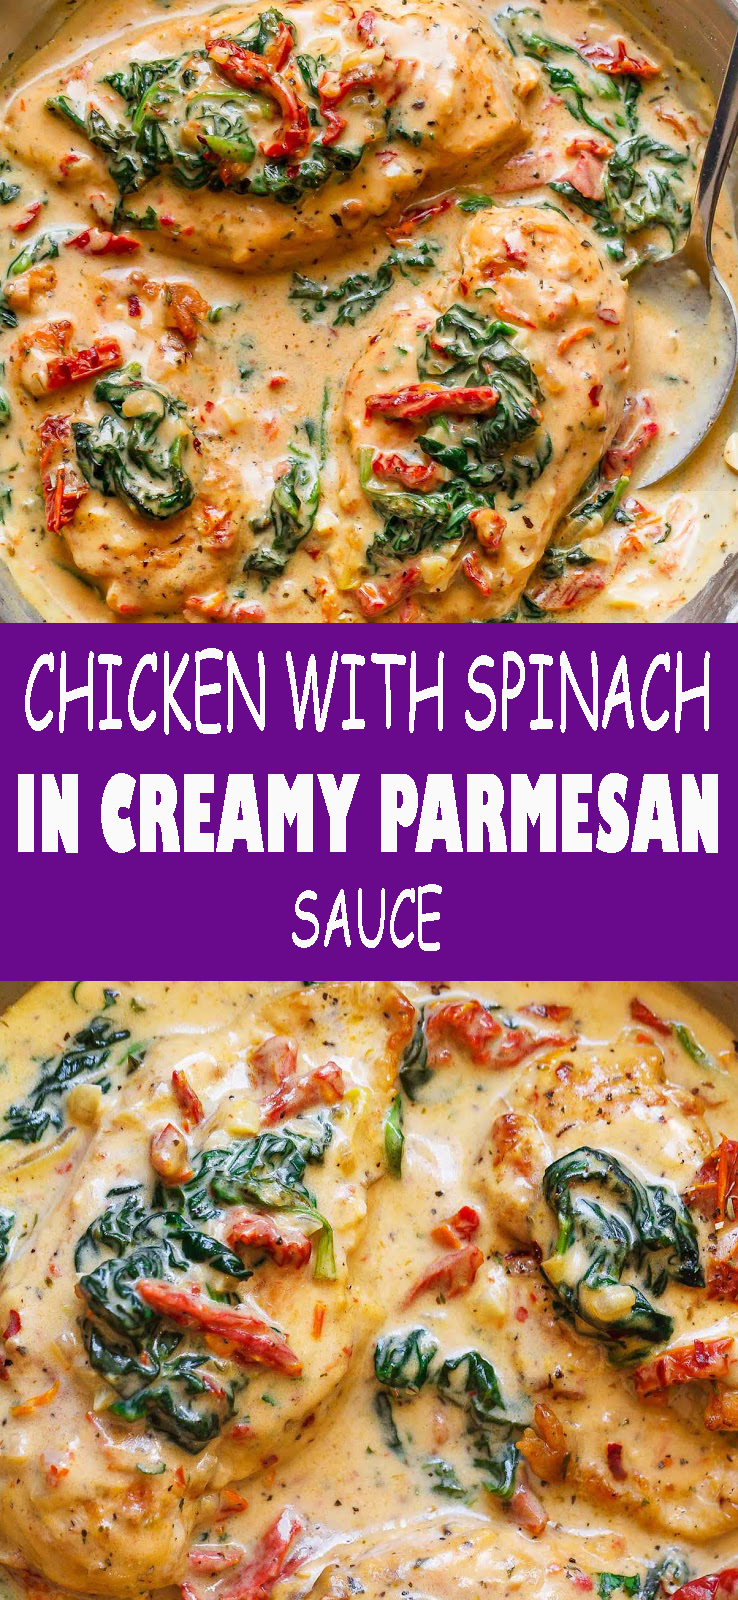 CHICKEN WITH SPINACH IN CREAMY PARMESAN SAUCE - pinsgreatrecipes4